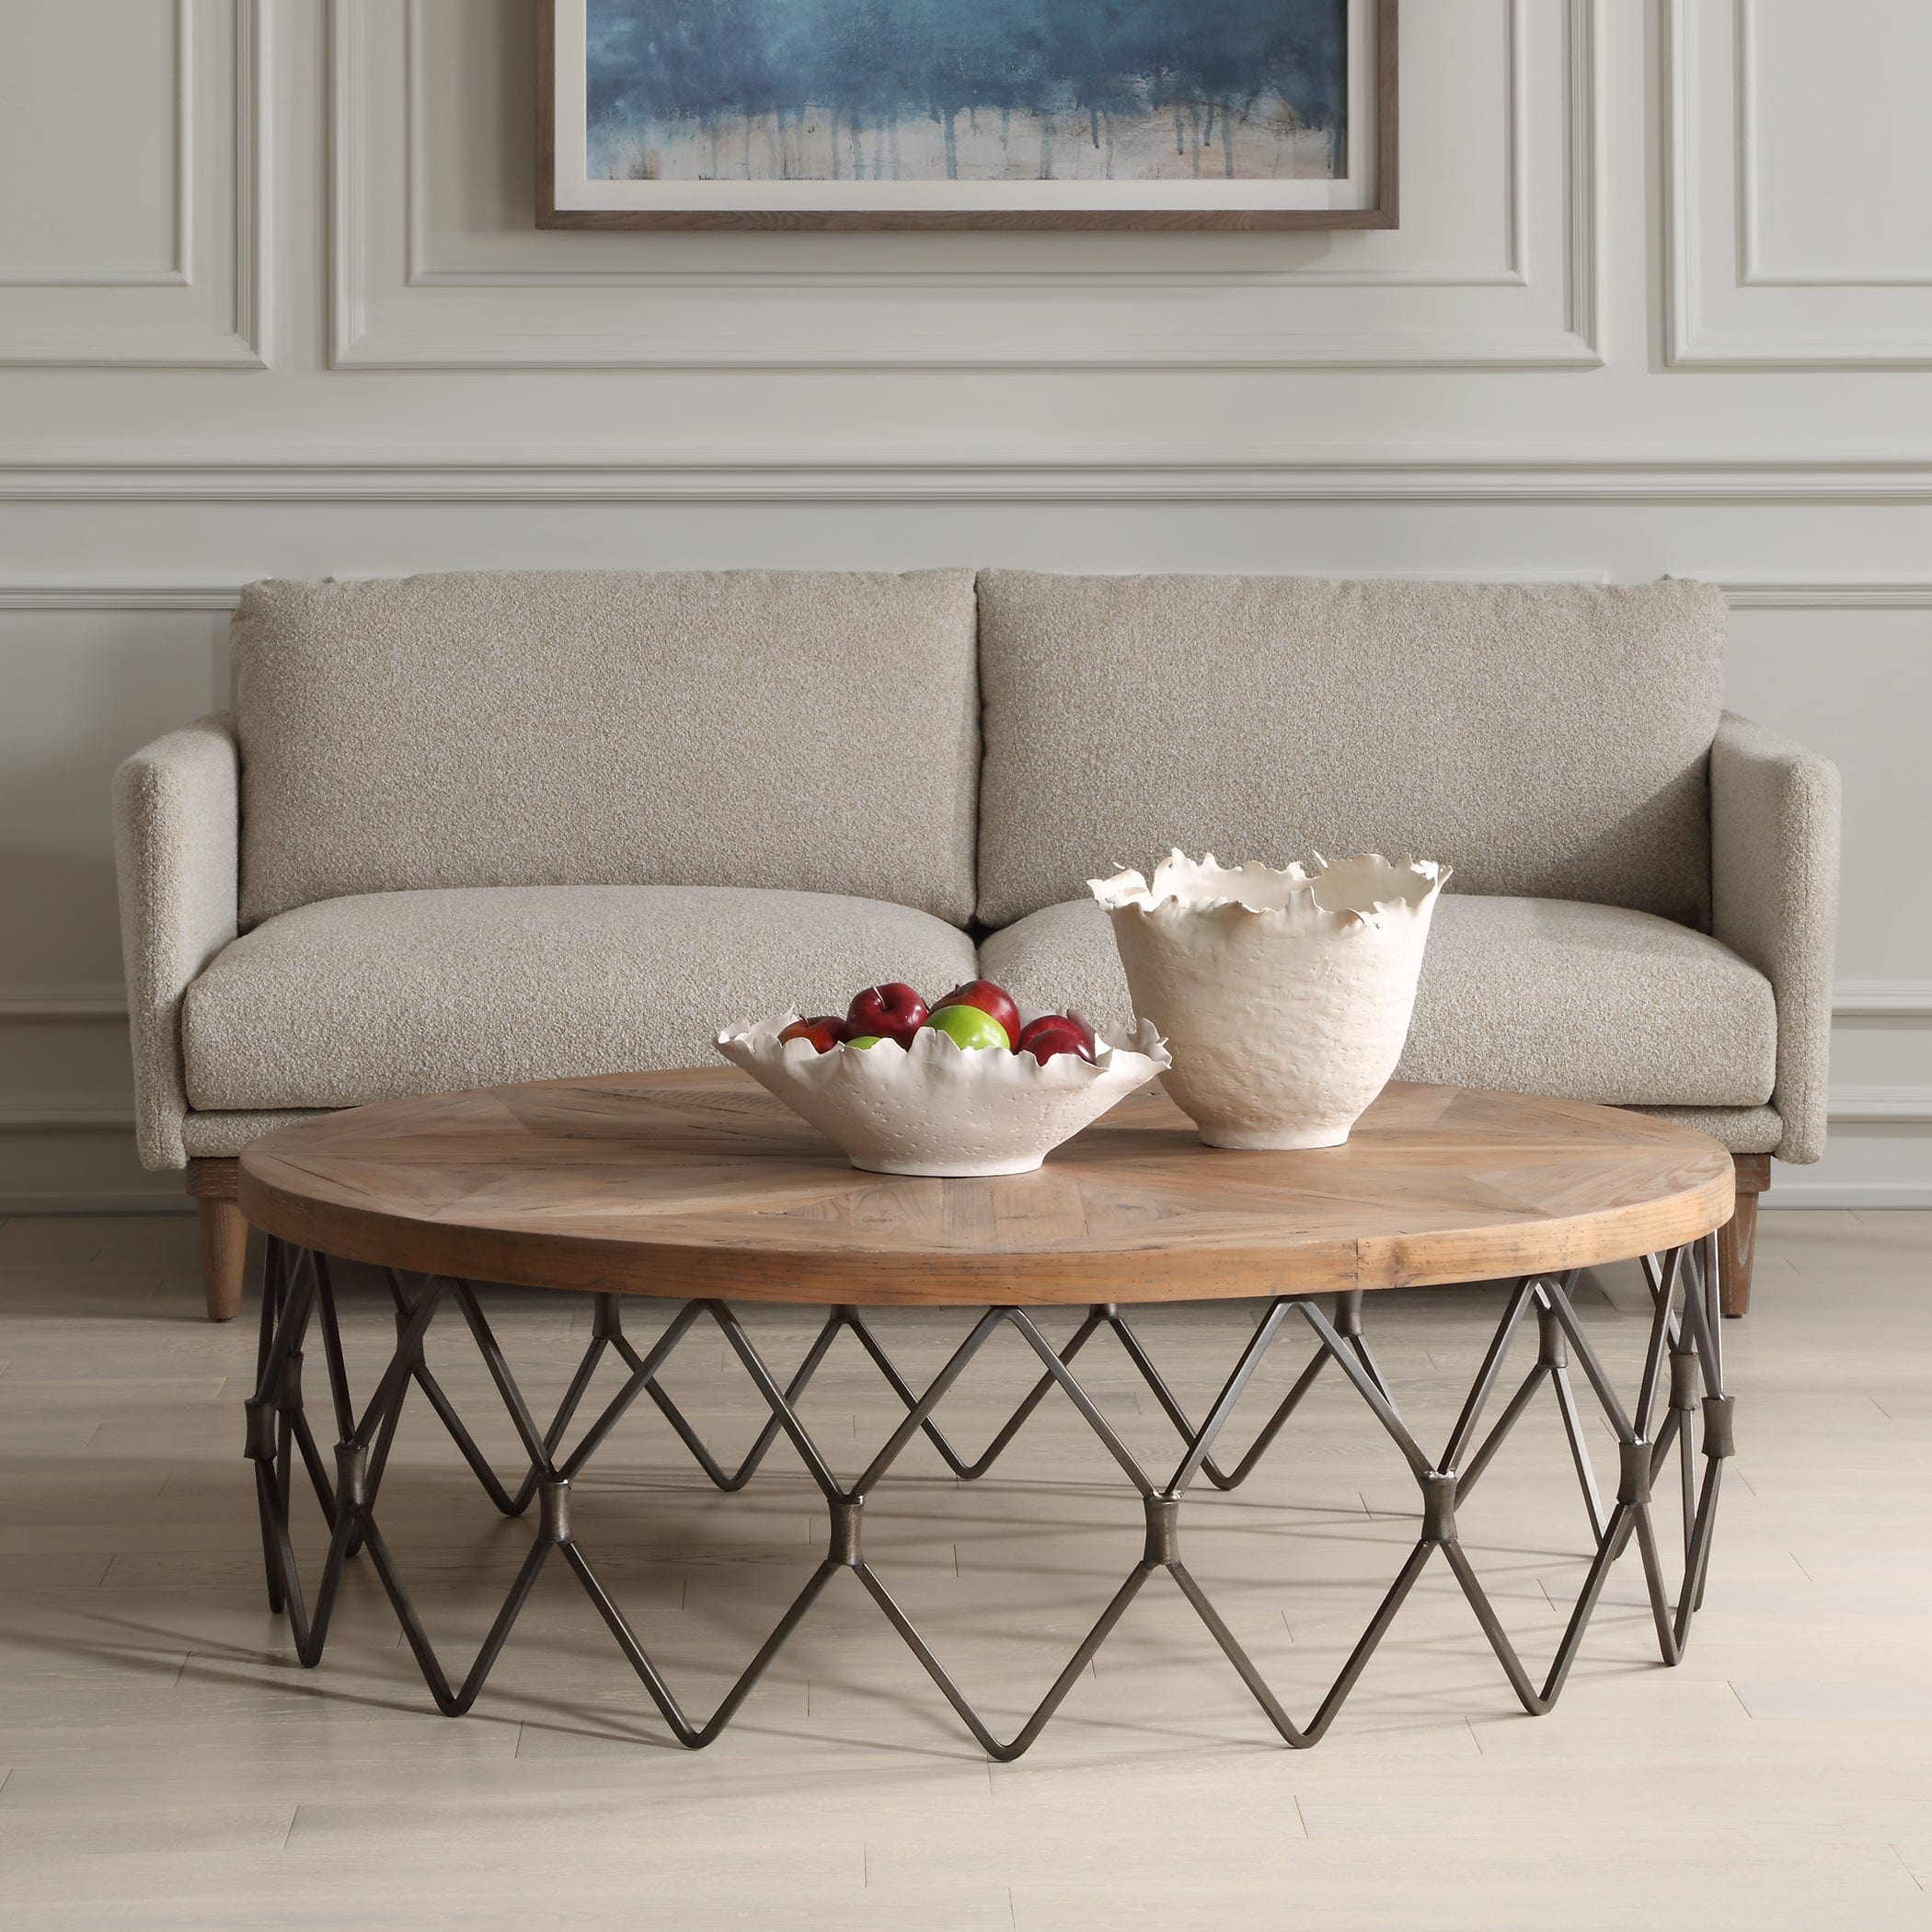 Chain Reaction Wooden Coffee Table Uttermost